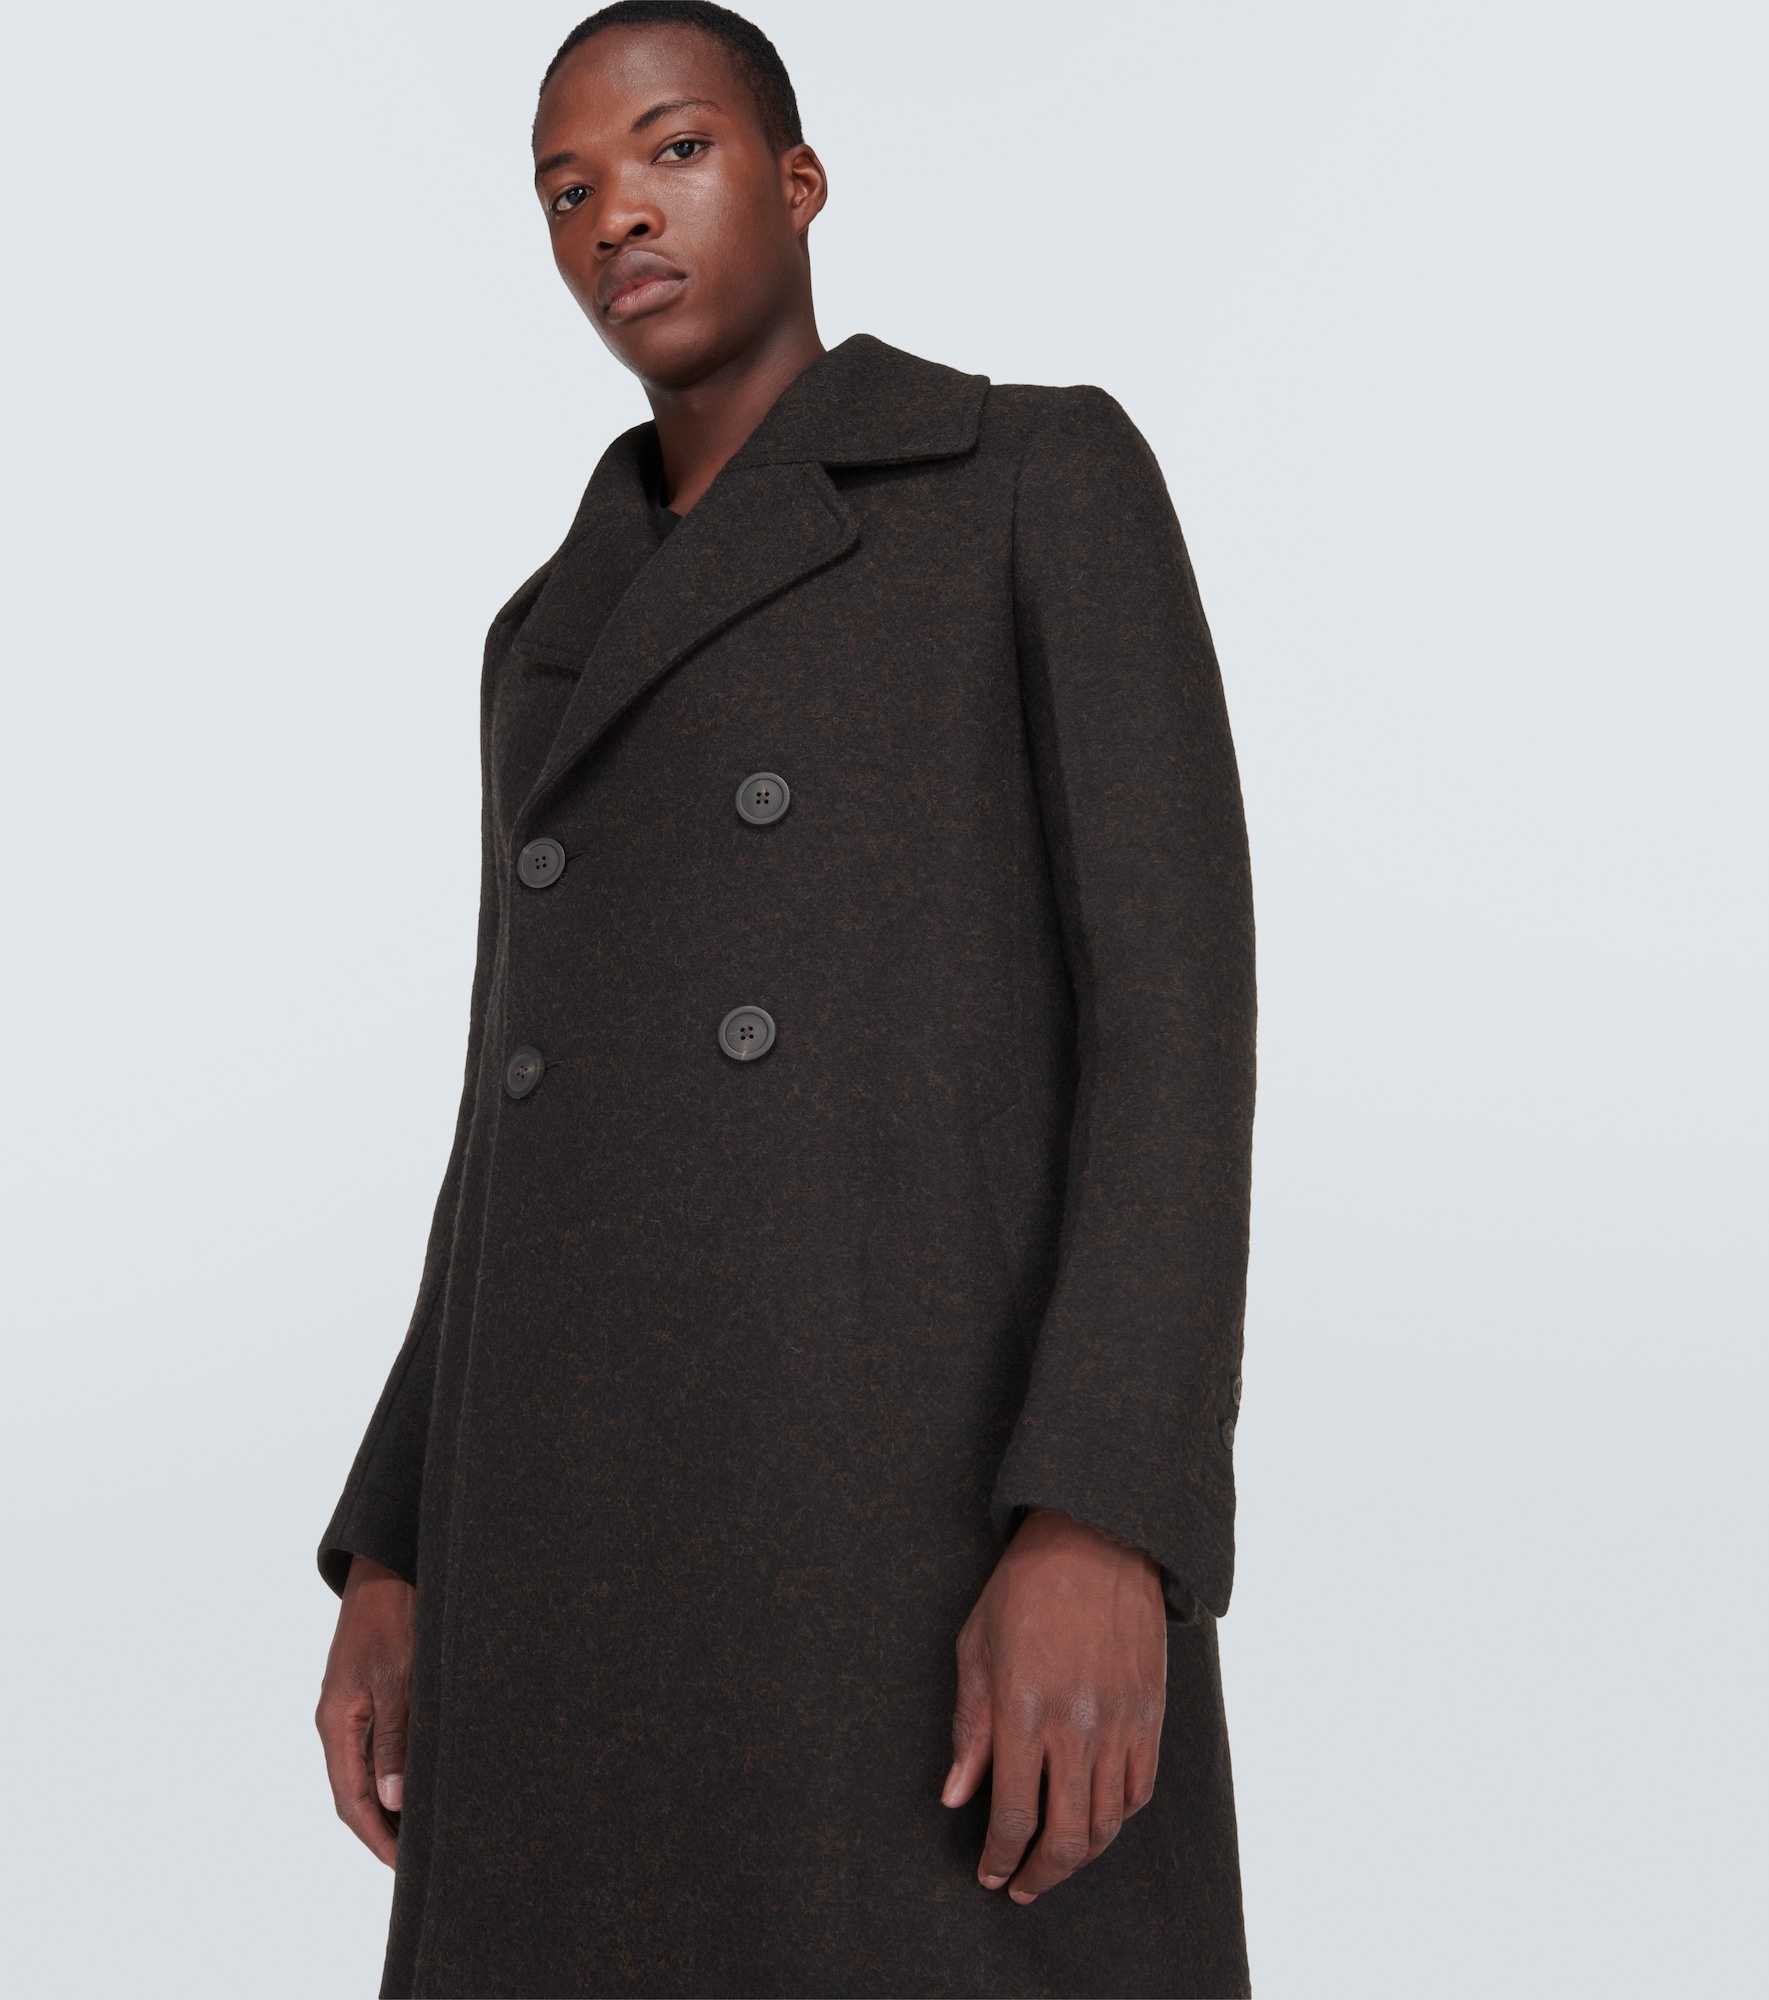 New Bell double-breasted wool coat - 5